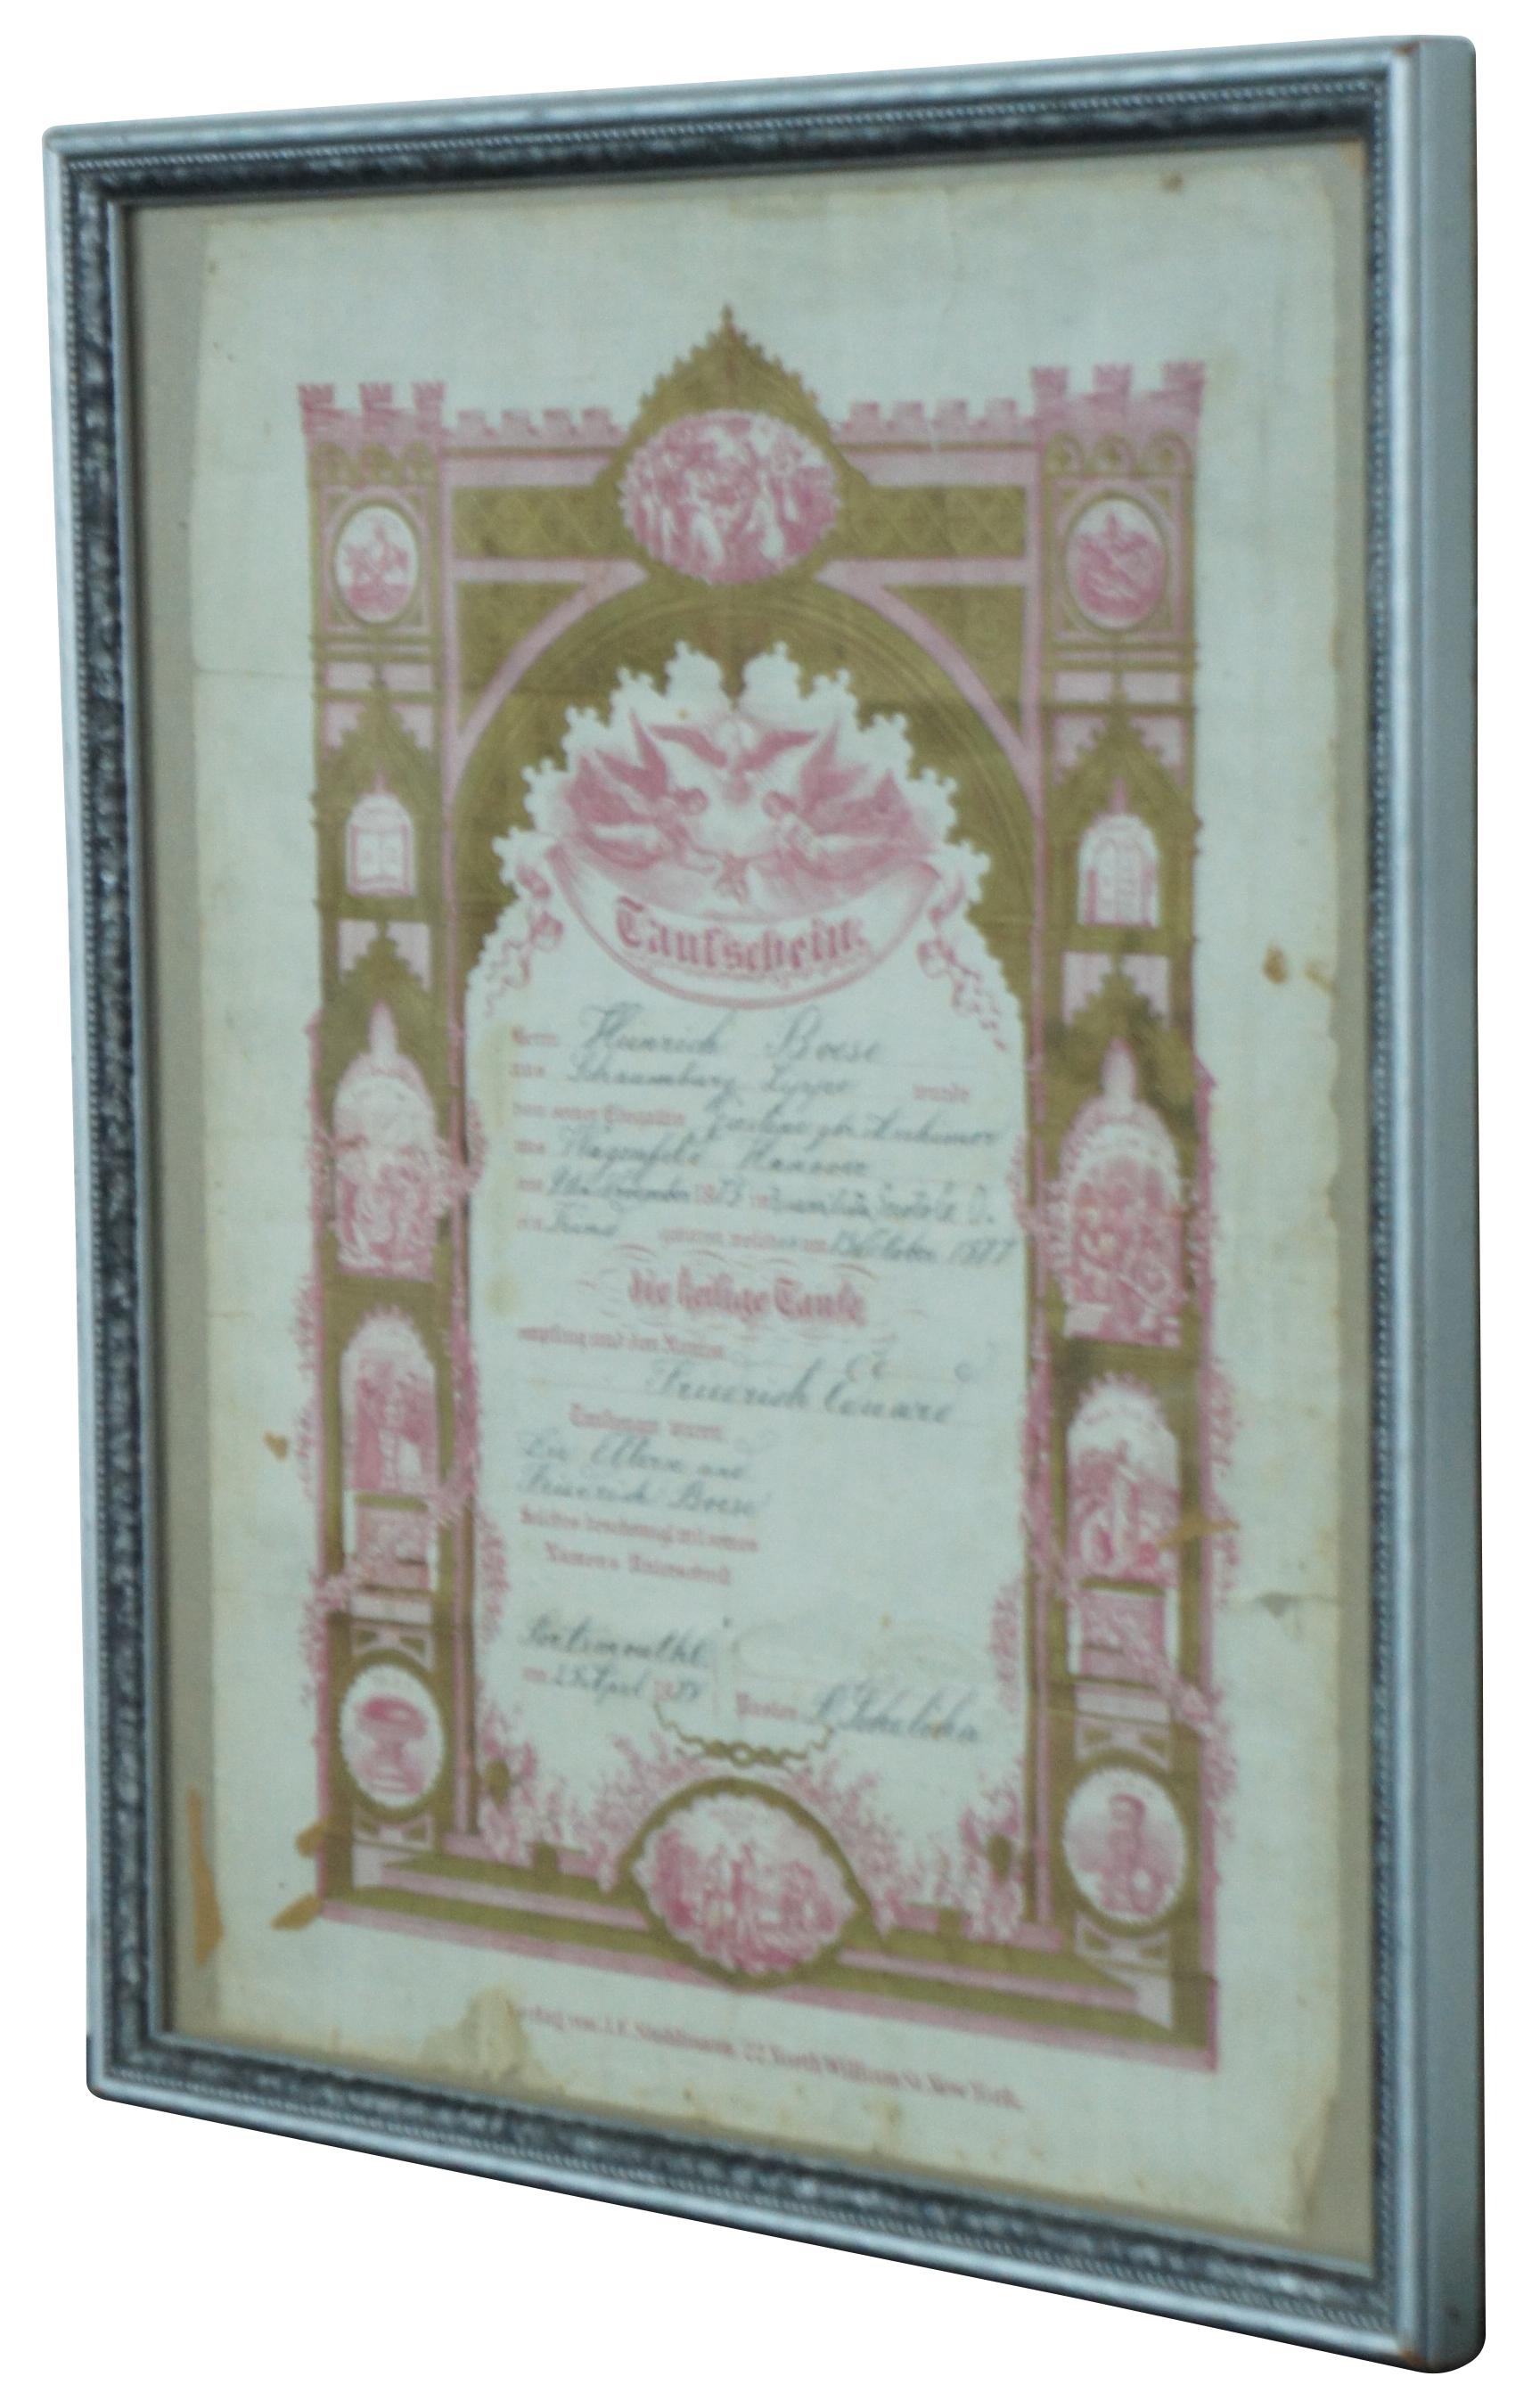 Antique 1873-1877 Taufschein or German baptismal certificate, printed in pink/red with gold accents, published by J.E. Stohlmann of New York. Measure: 13